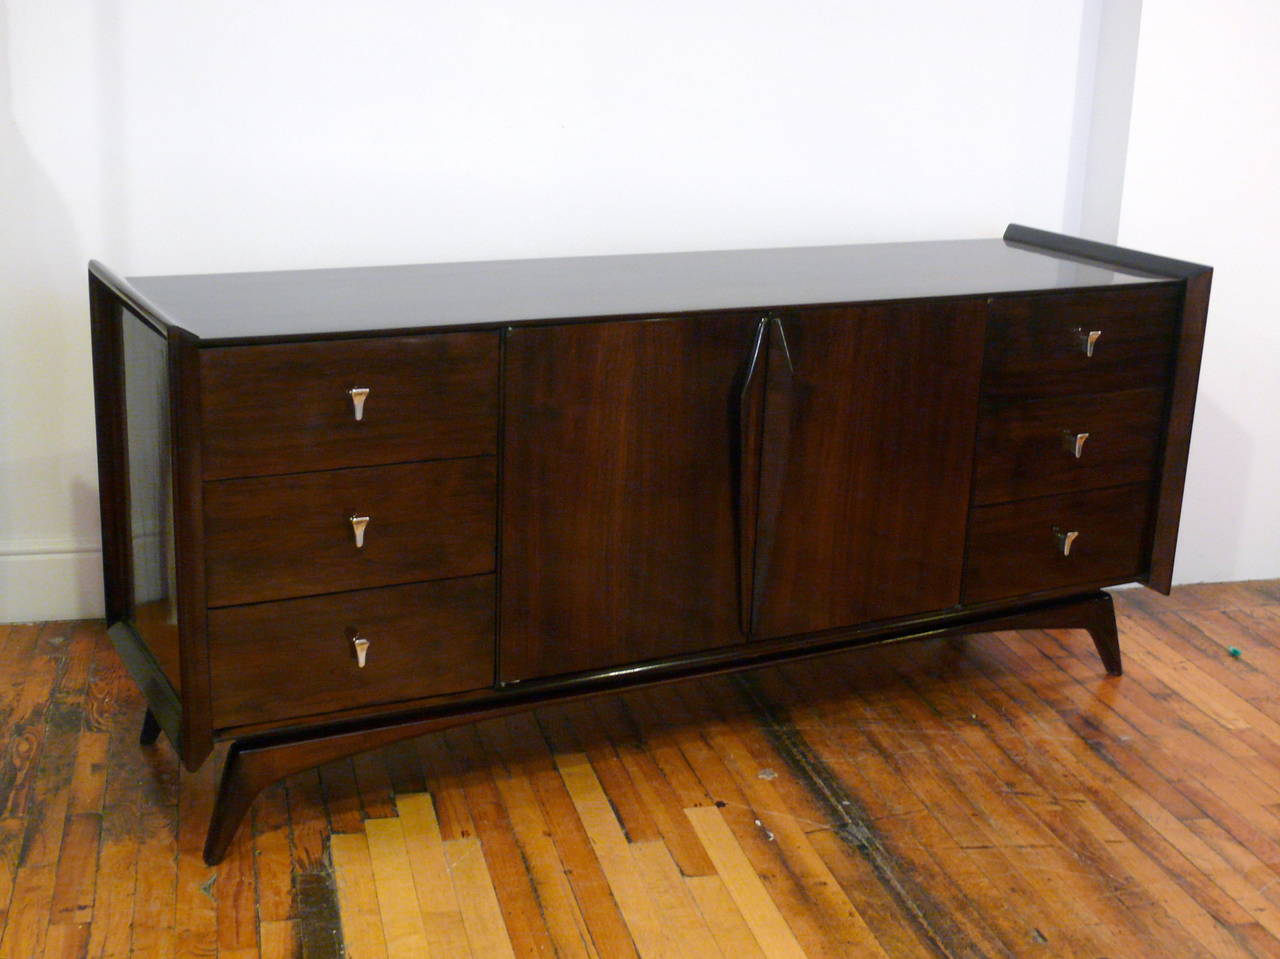 Exceptional Mid-Century credenza in the manner of Gio Ponti with beautiful flared ends resting on a sculptural base.  The middle doors reveal 3 additional deep drawers for extra storage space. Perfectly refinished in a high gloss medium walnut with